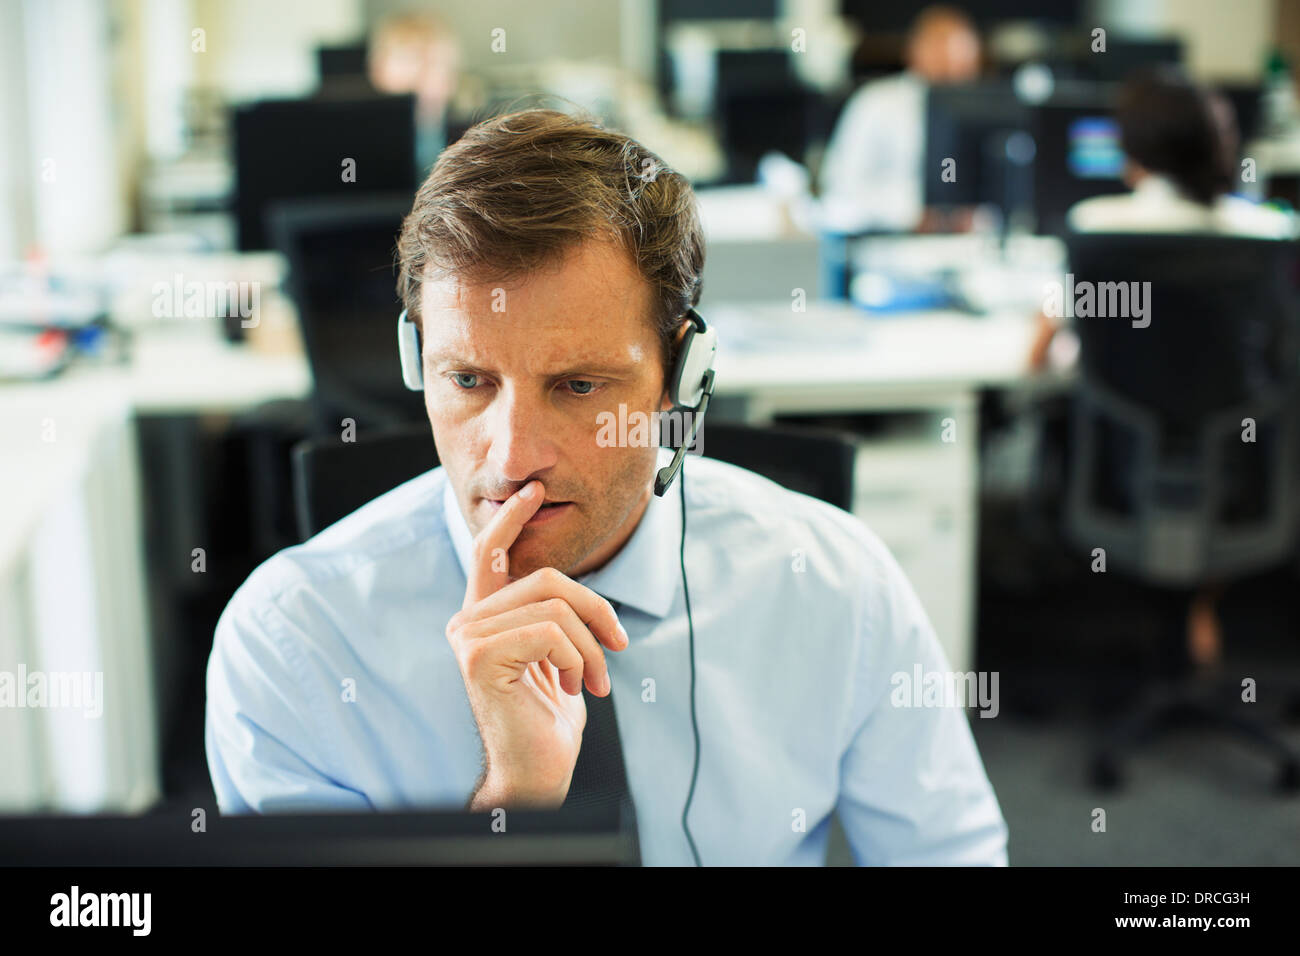 Businessman wearing headset in office Stock Photo